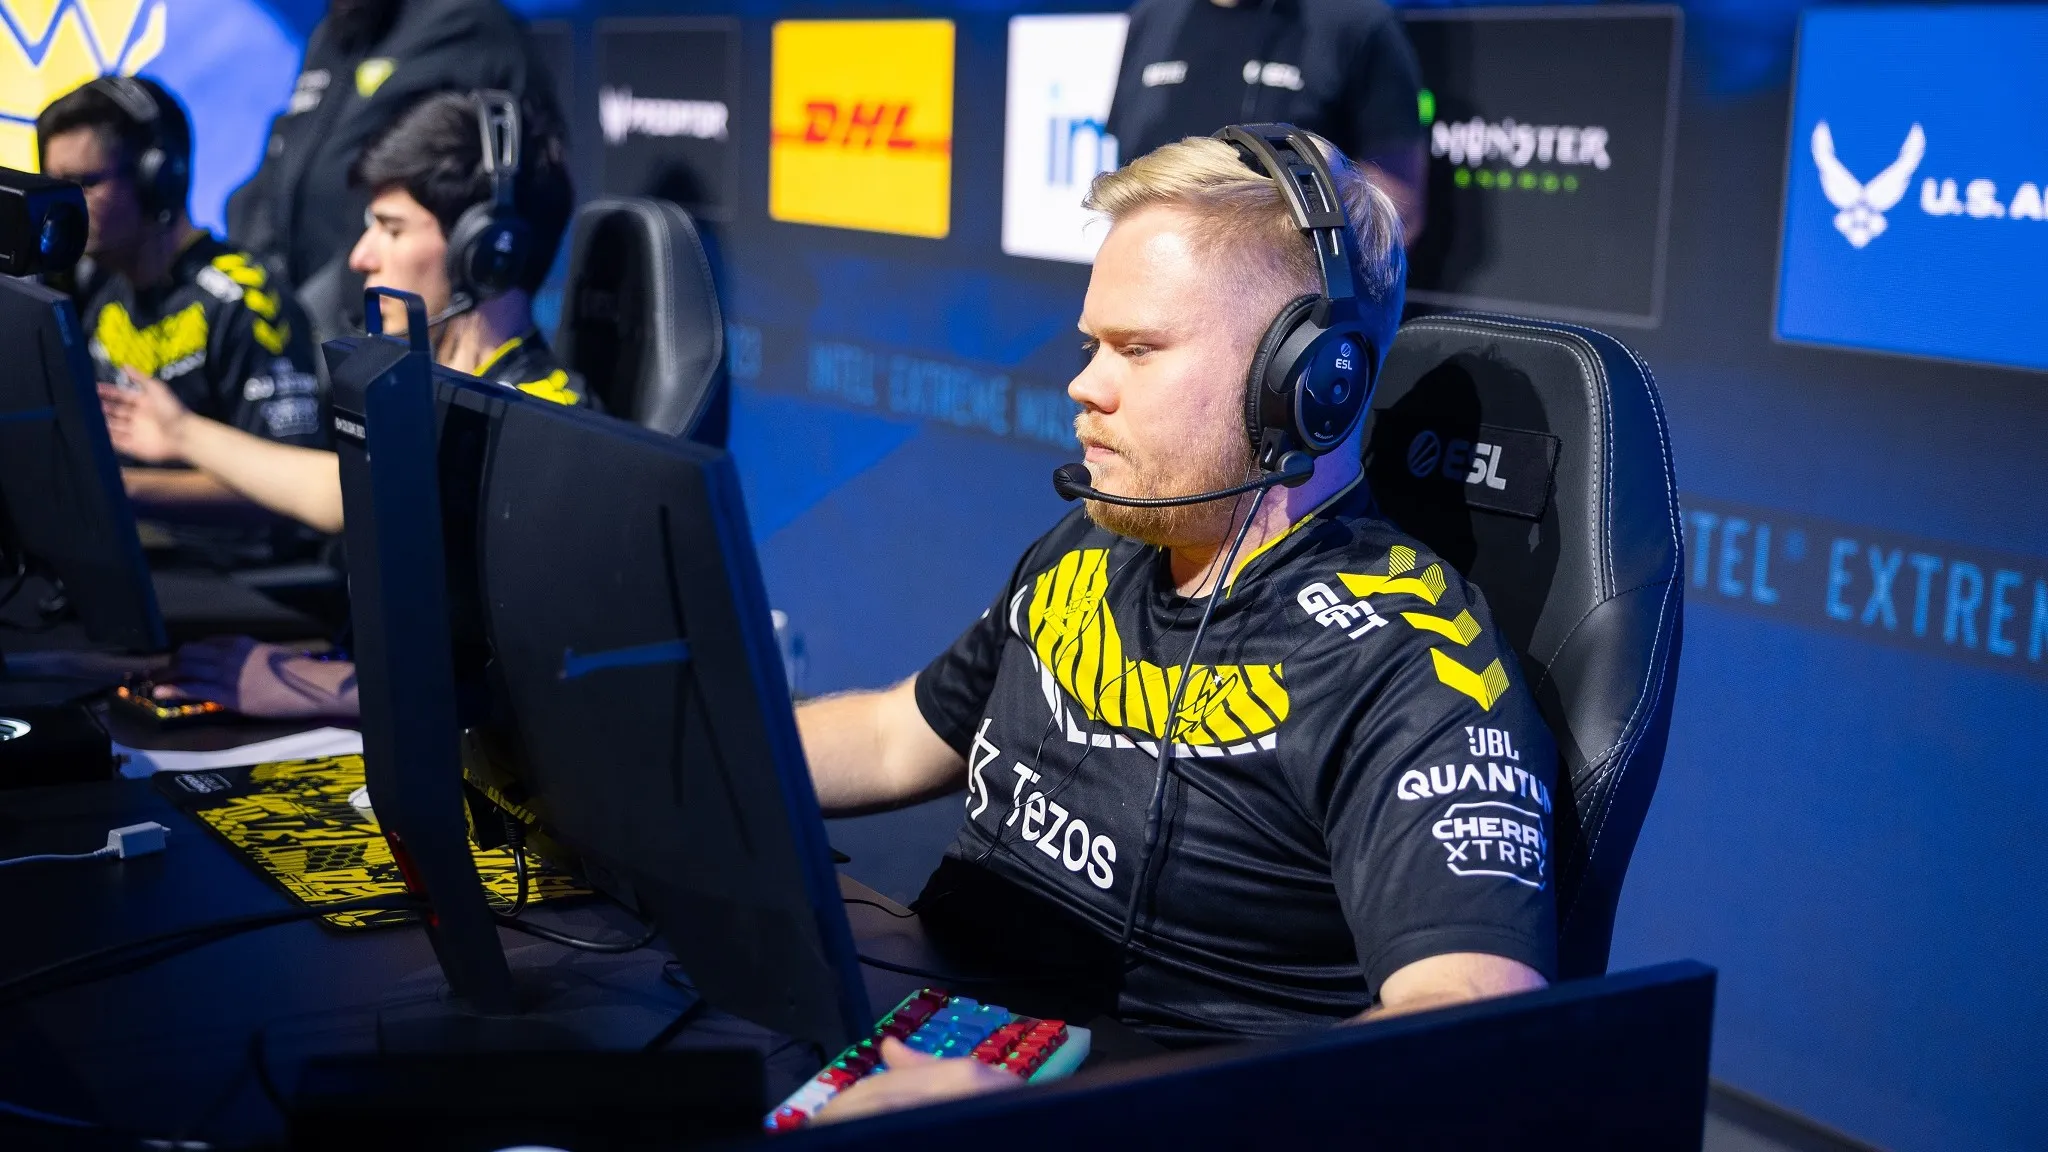 Magisk expresses concern over current CS2 Major format posing risks for orgs' investments